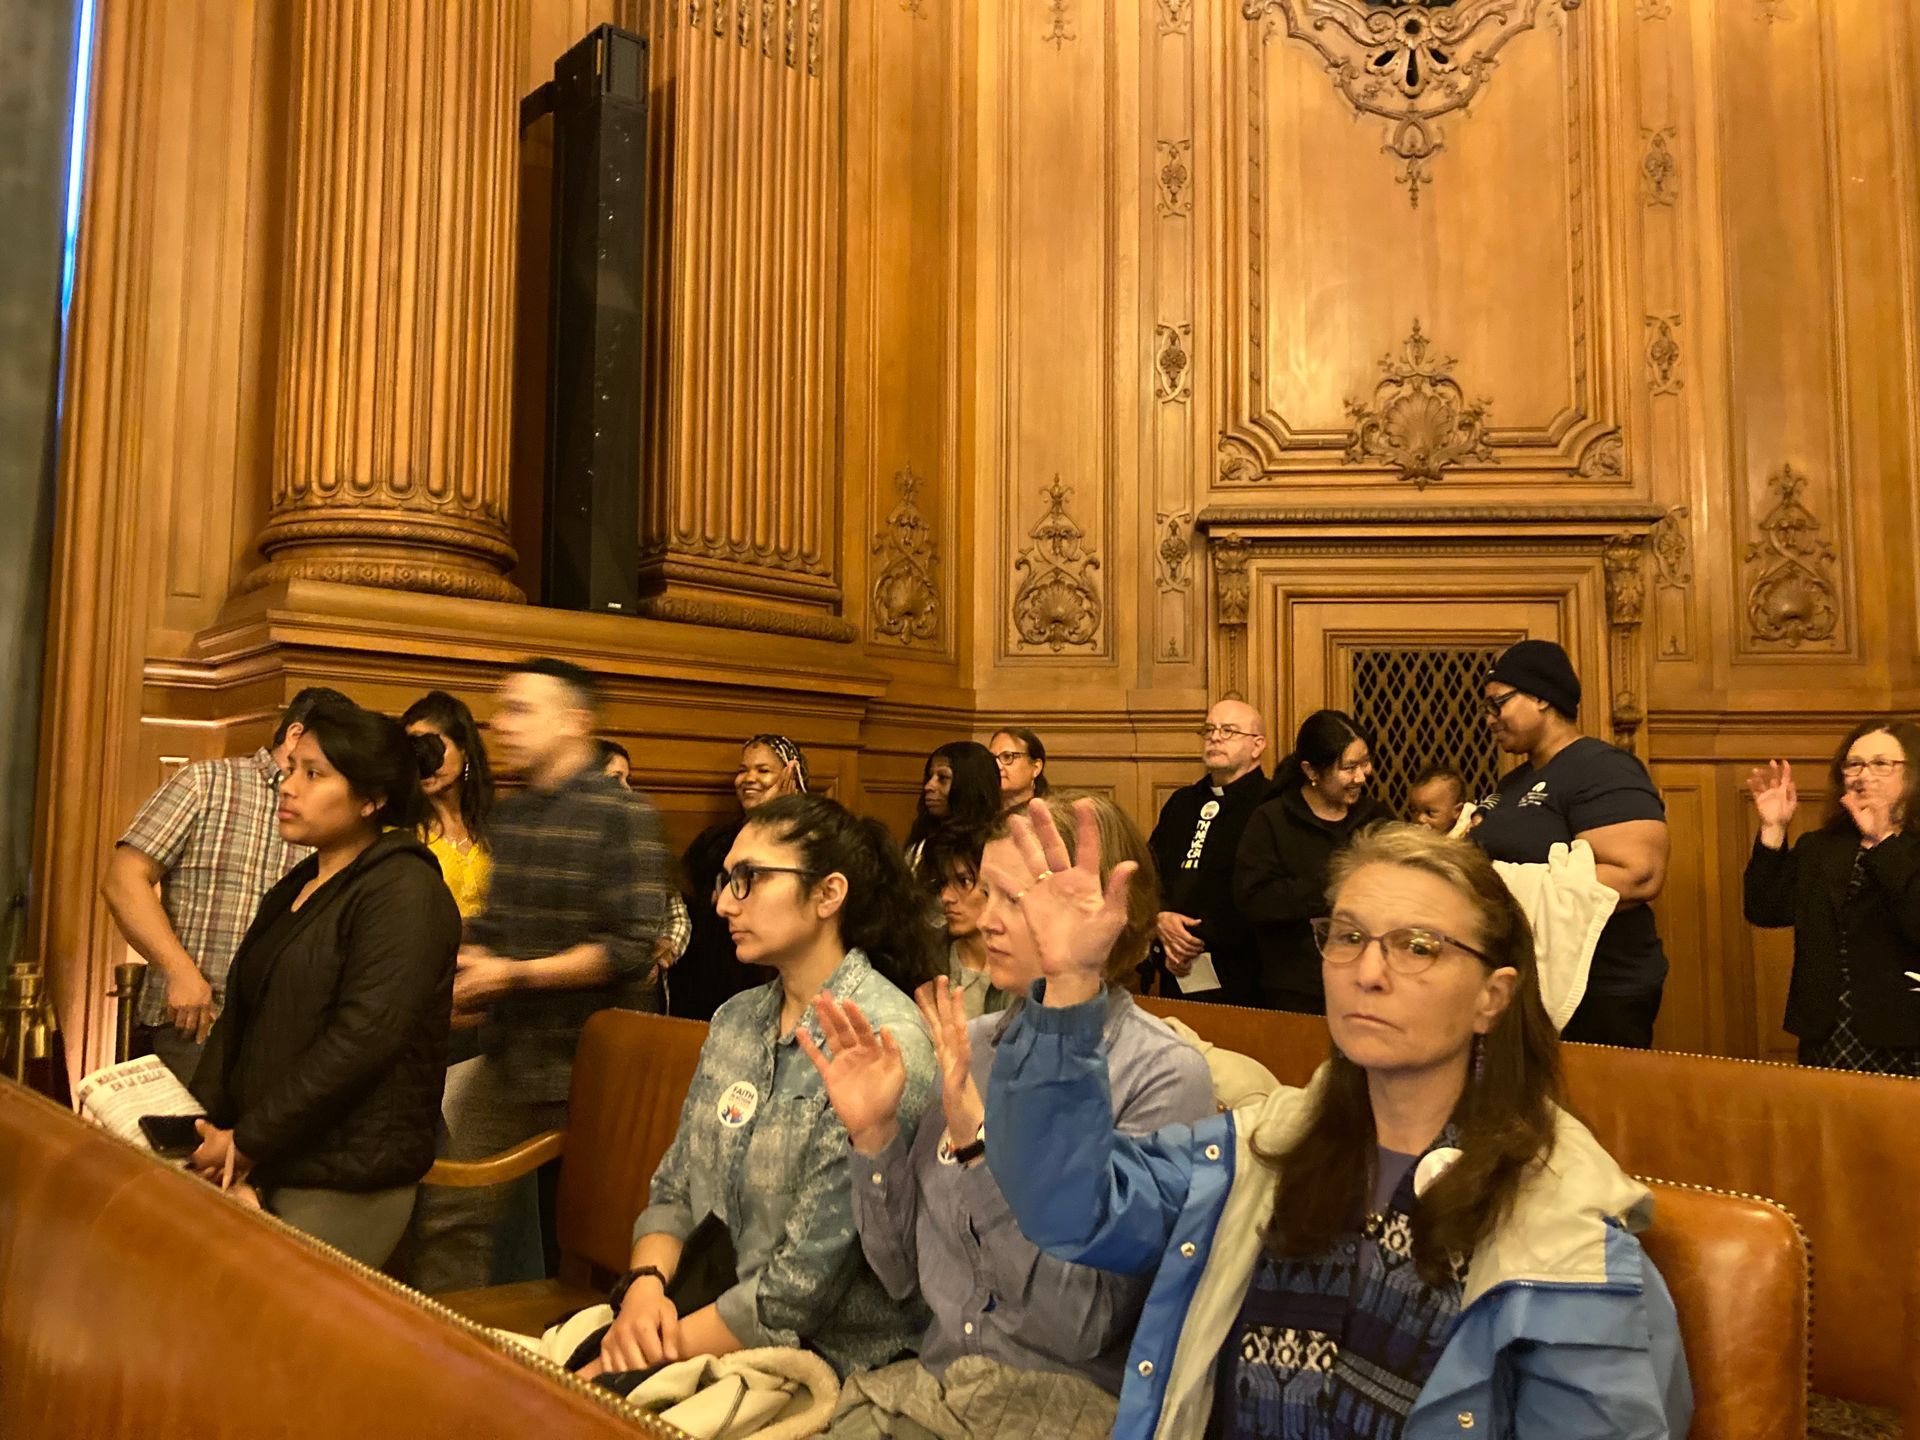 More FIABA goers sitting in the court hearing's seats. 